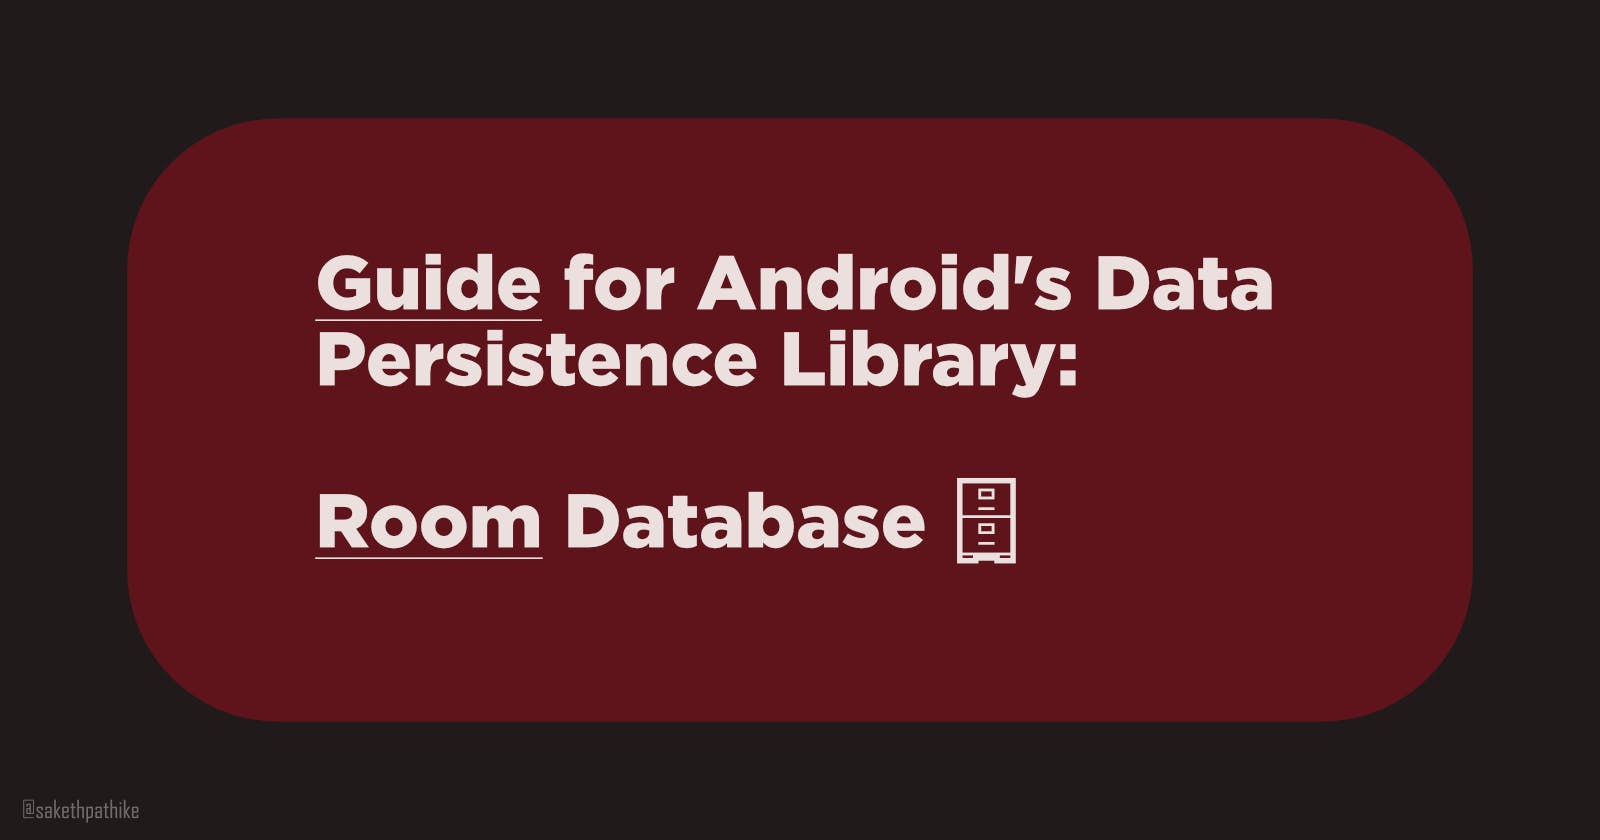 Guide for Android's Data Persistence Library - Room Database